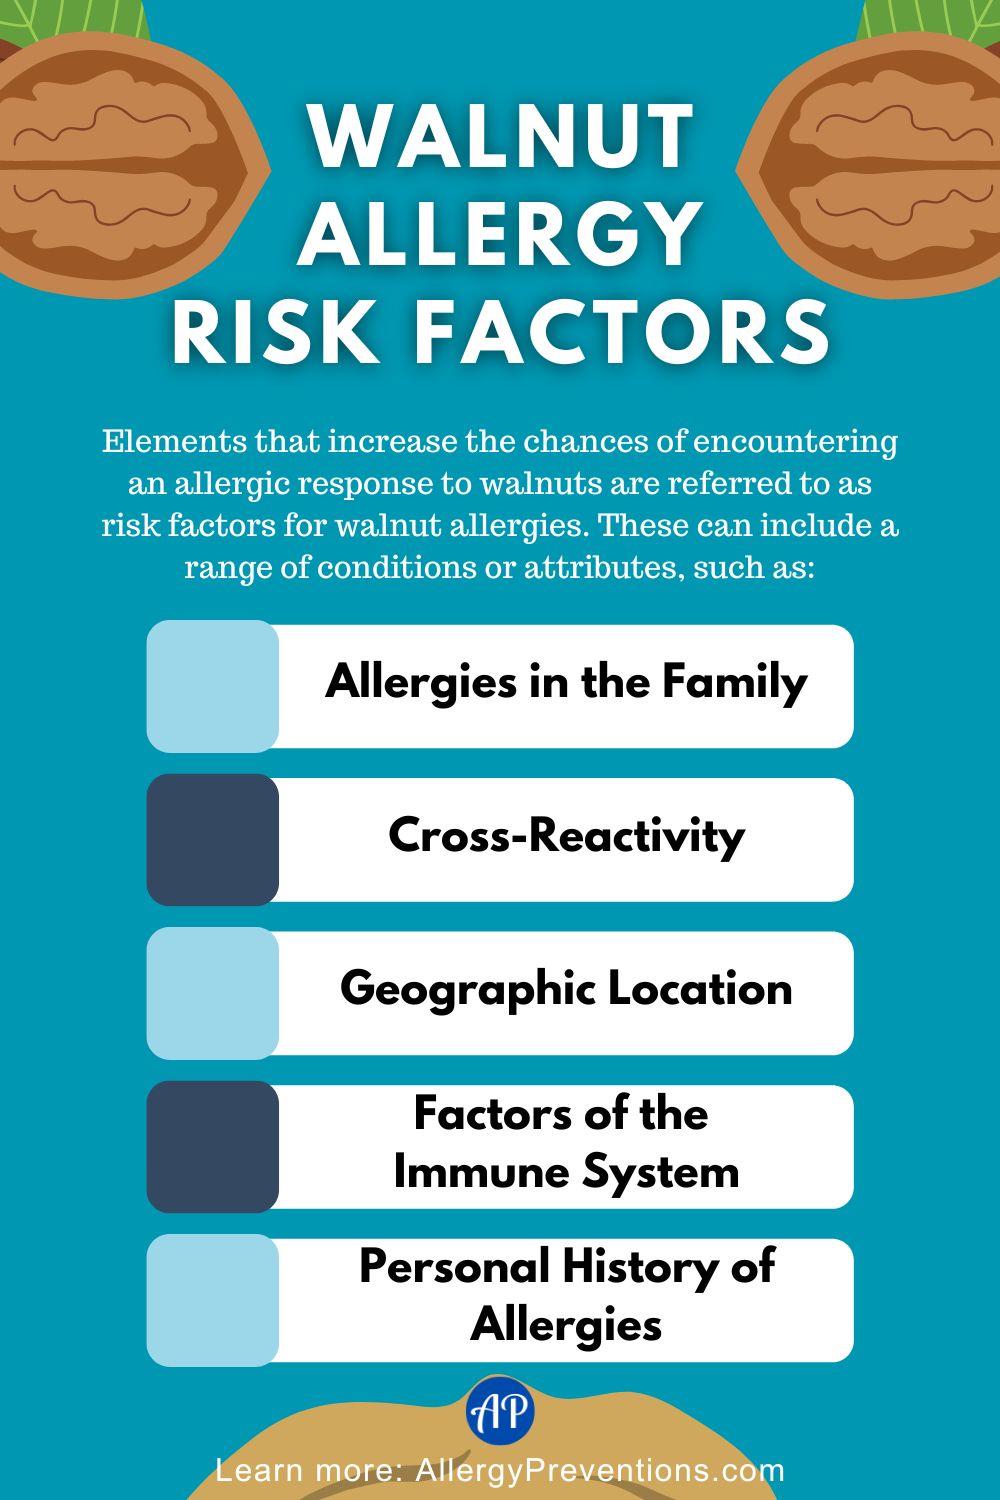 Walnut Allergy Risk Factors Infographic. Elements that increase the chances of encountering an allergic response to walnuts are referred to as risk factors for walnut allergies. These can include a range of conditions or attributes, such as: Allergies in the Family, Cross-Reactivity, Geographic Location, Factors of the , Immune System, and Personal History of Allergies.